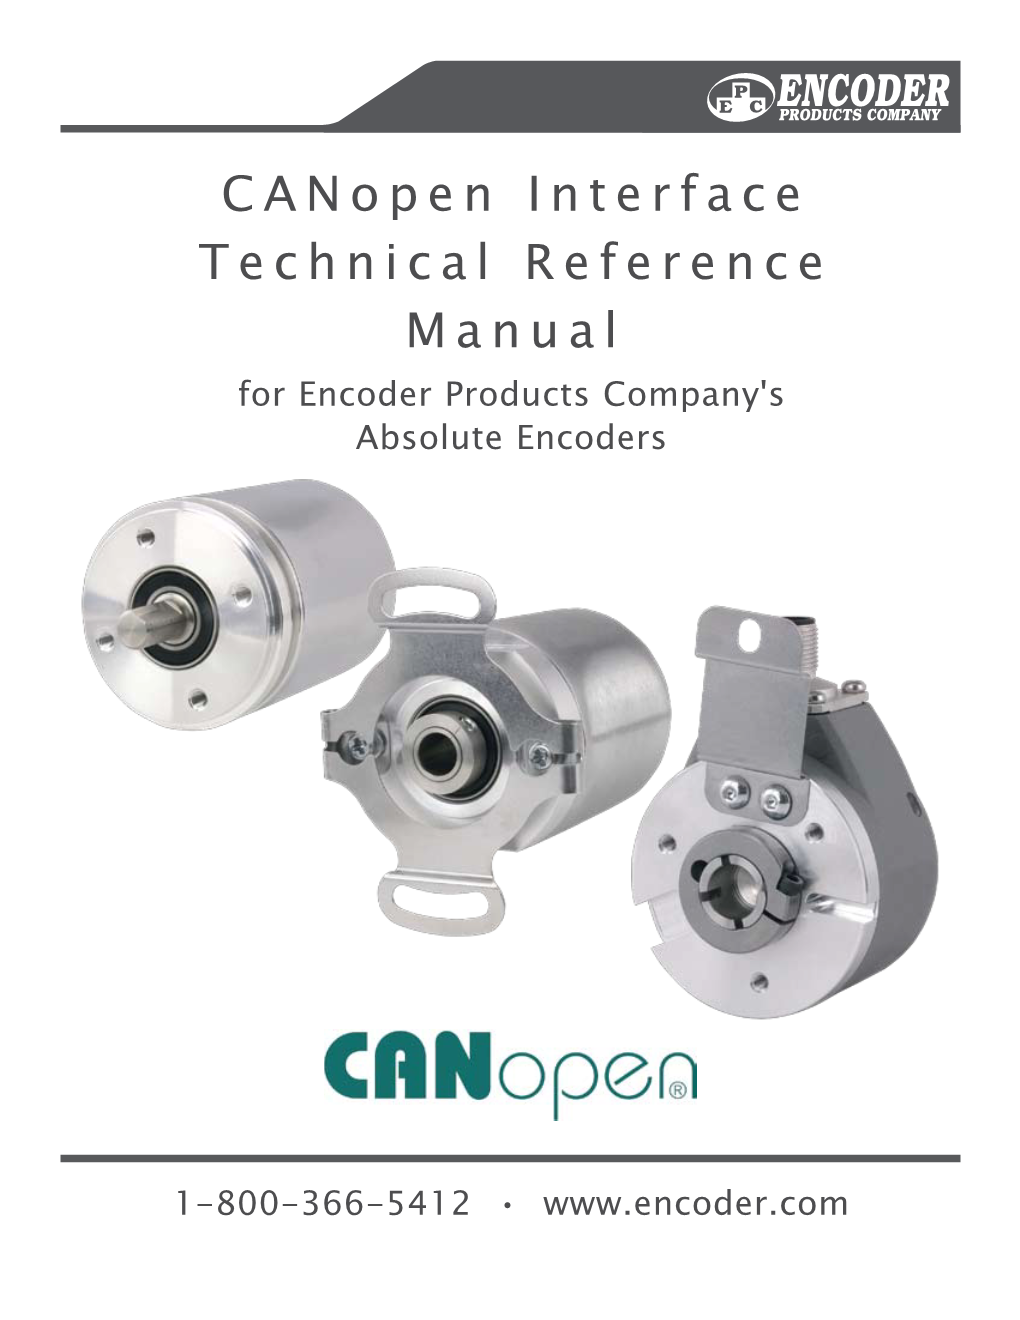 Canopen® Technical Reference Manual